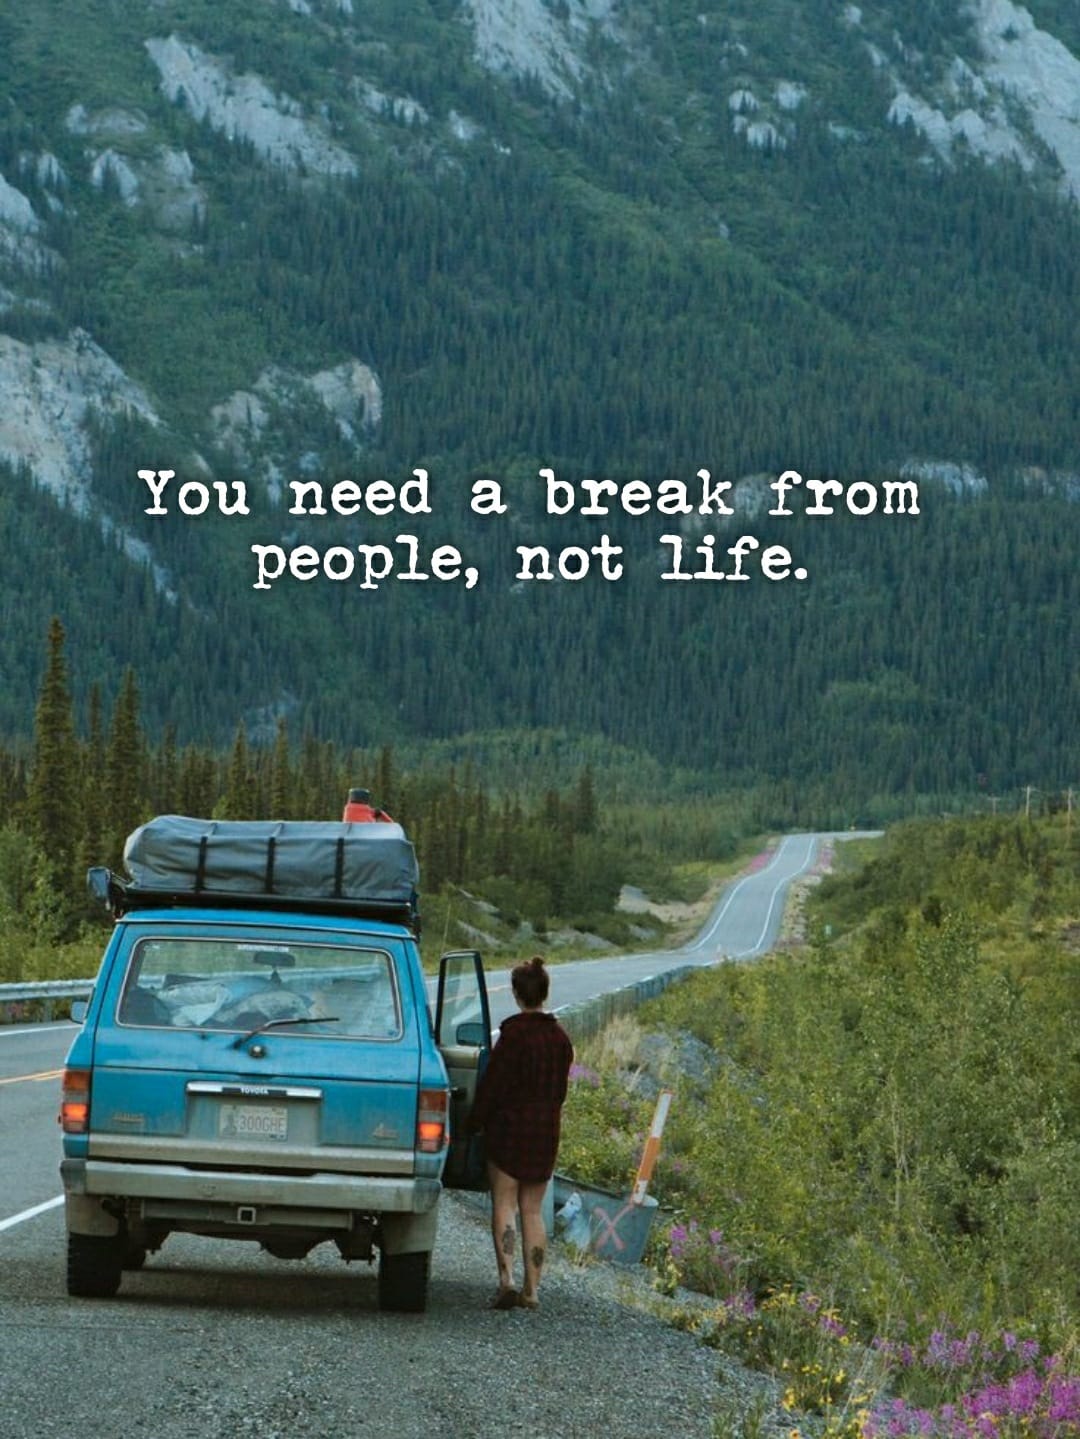 You need a break from people, not life.